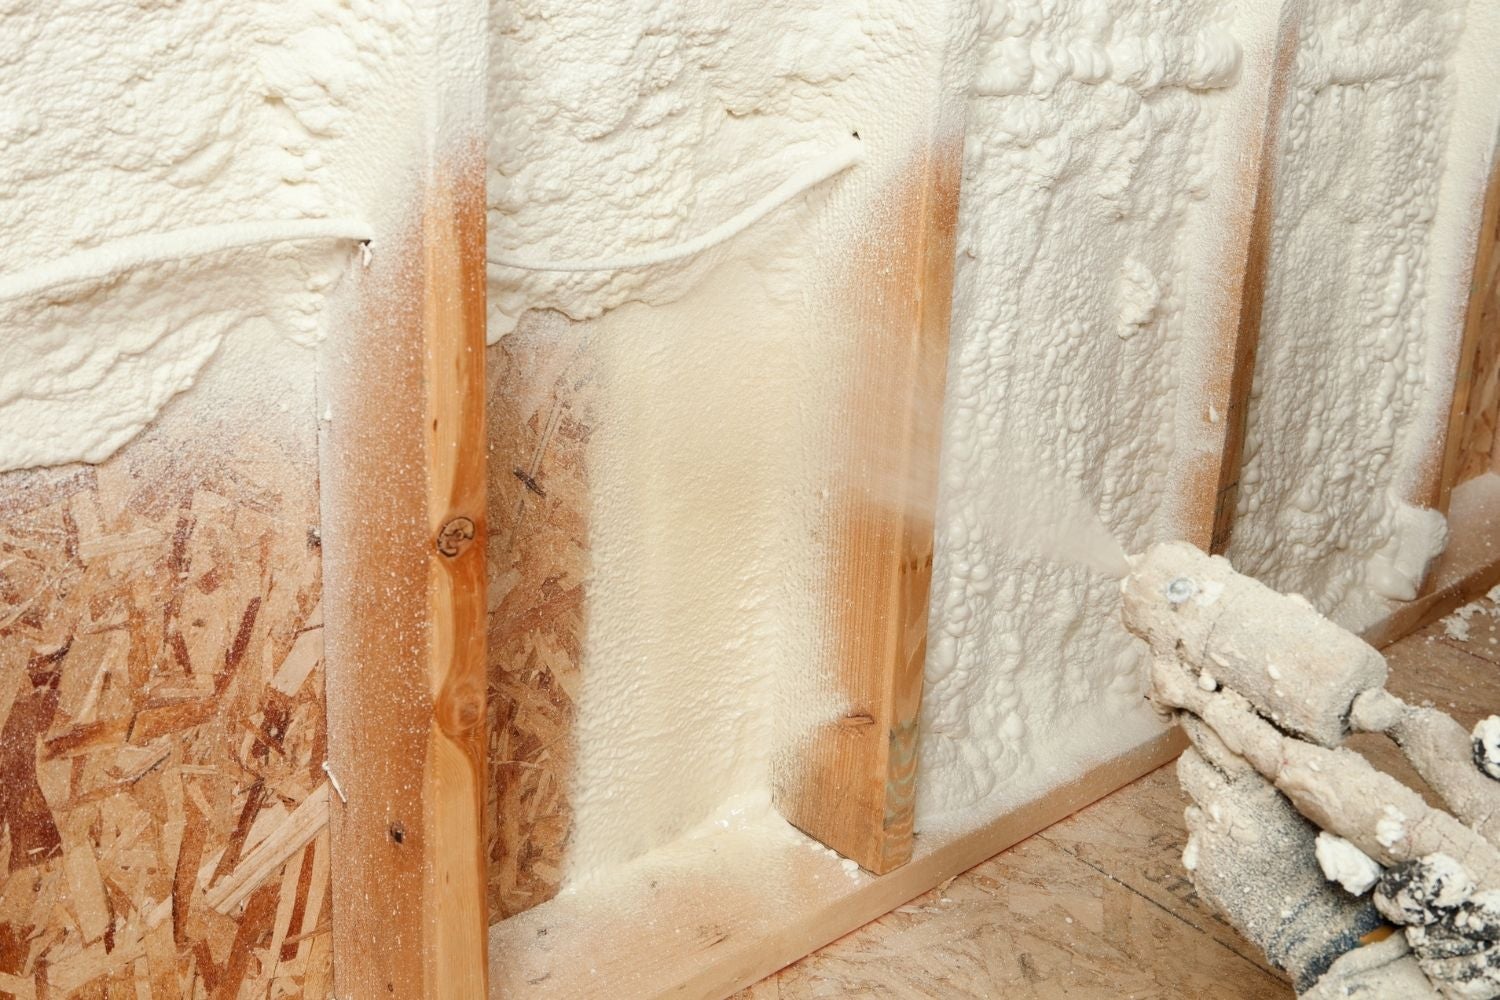 How To Spray Foam Insulation In An Attic